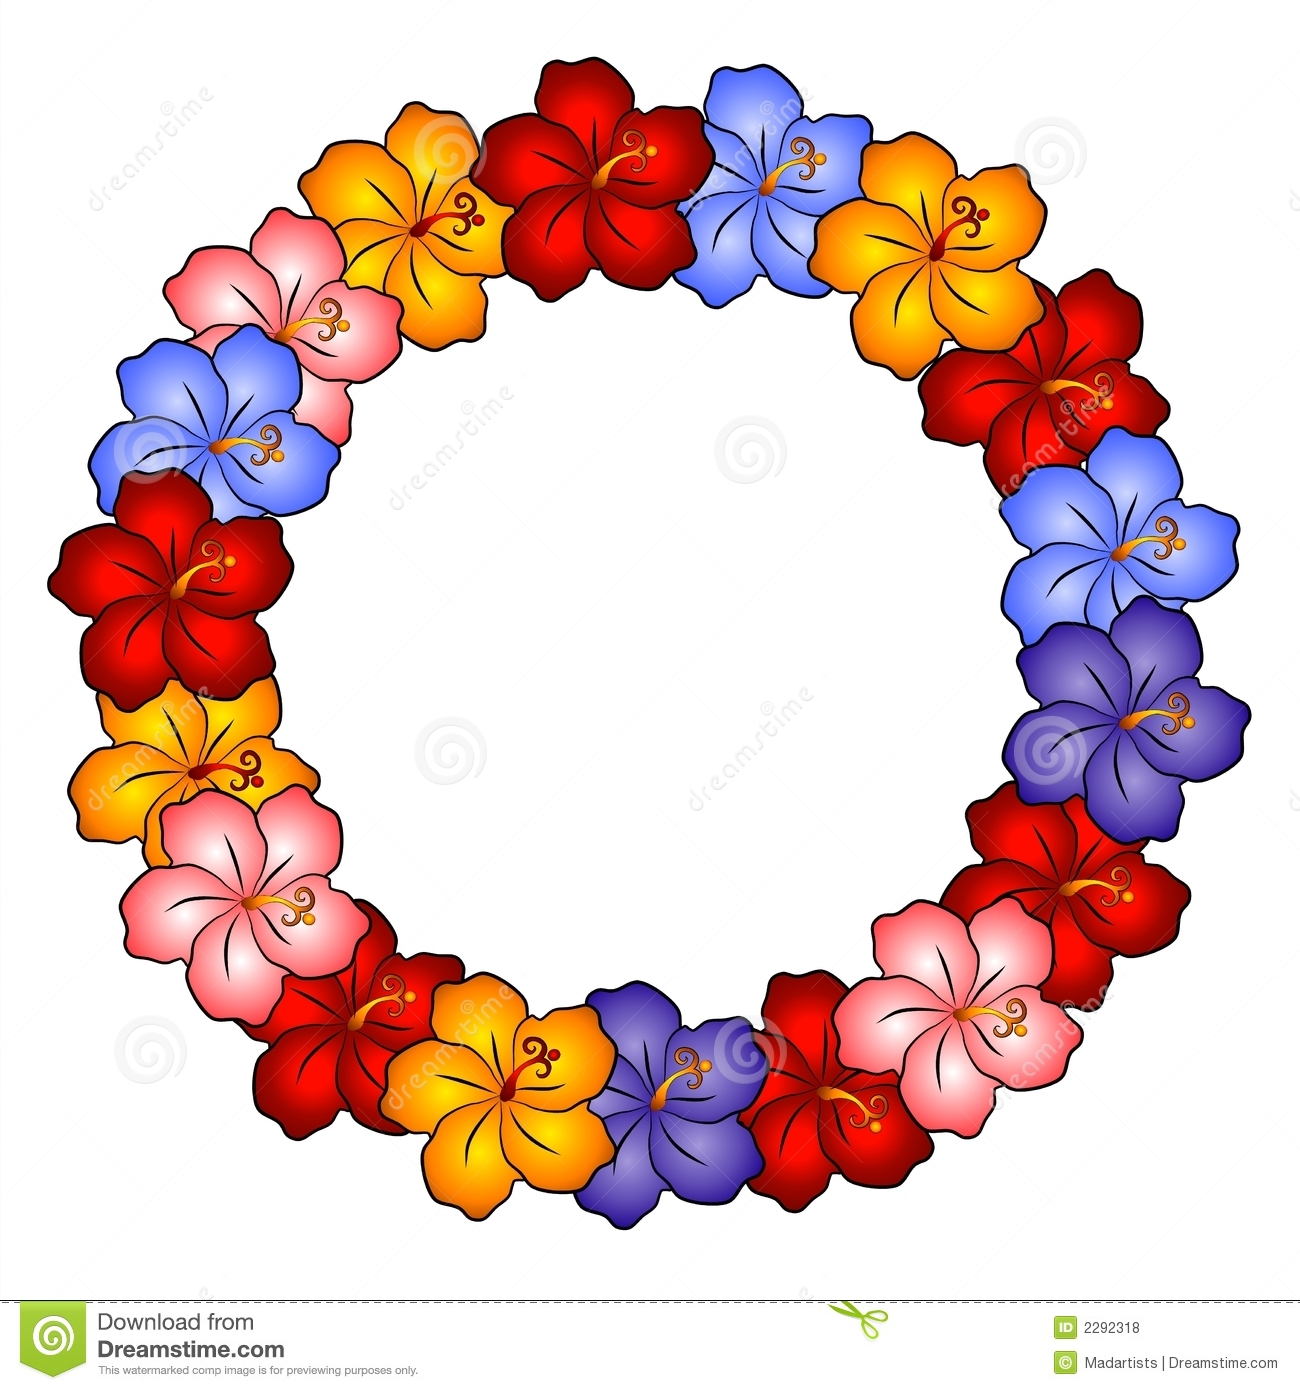 Image With Hawaiian Flowers Clip Art Clipart Panda Free Clipart Images